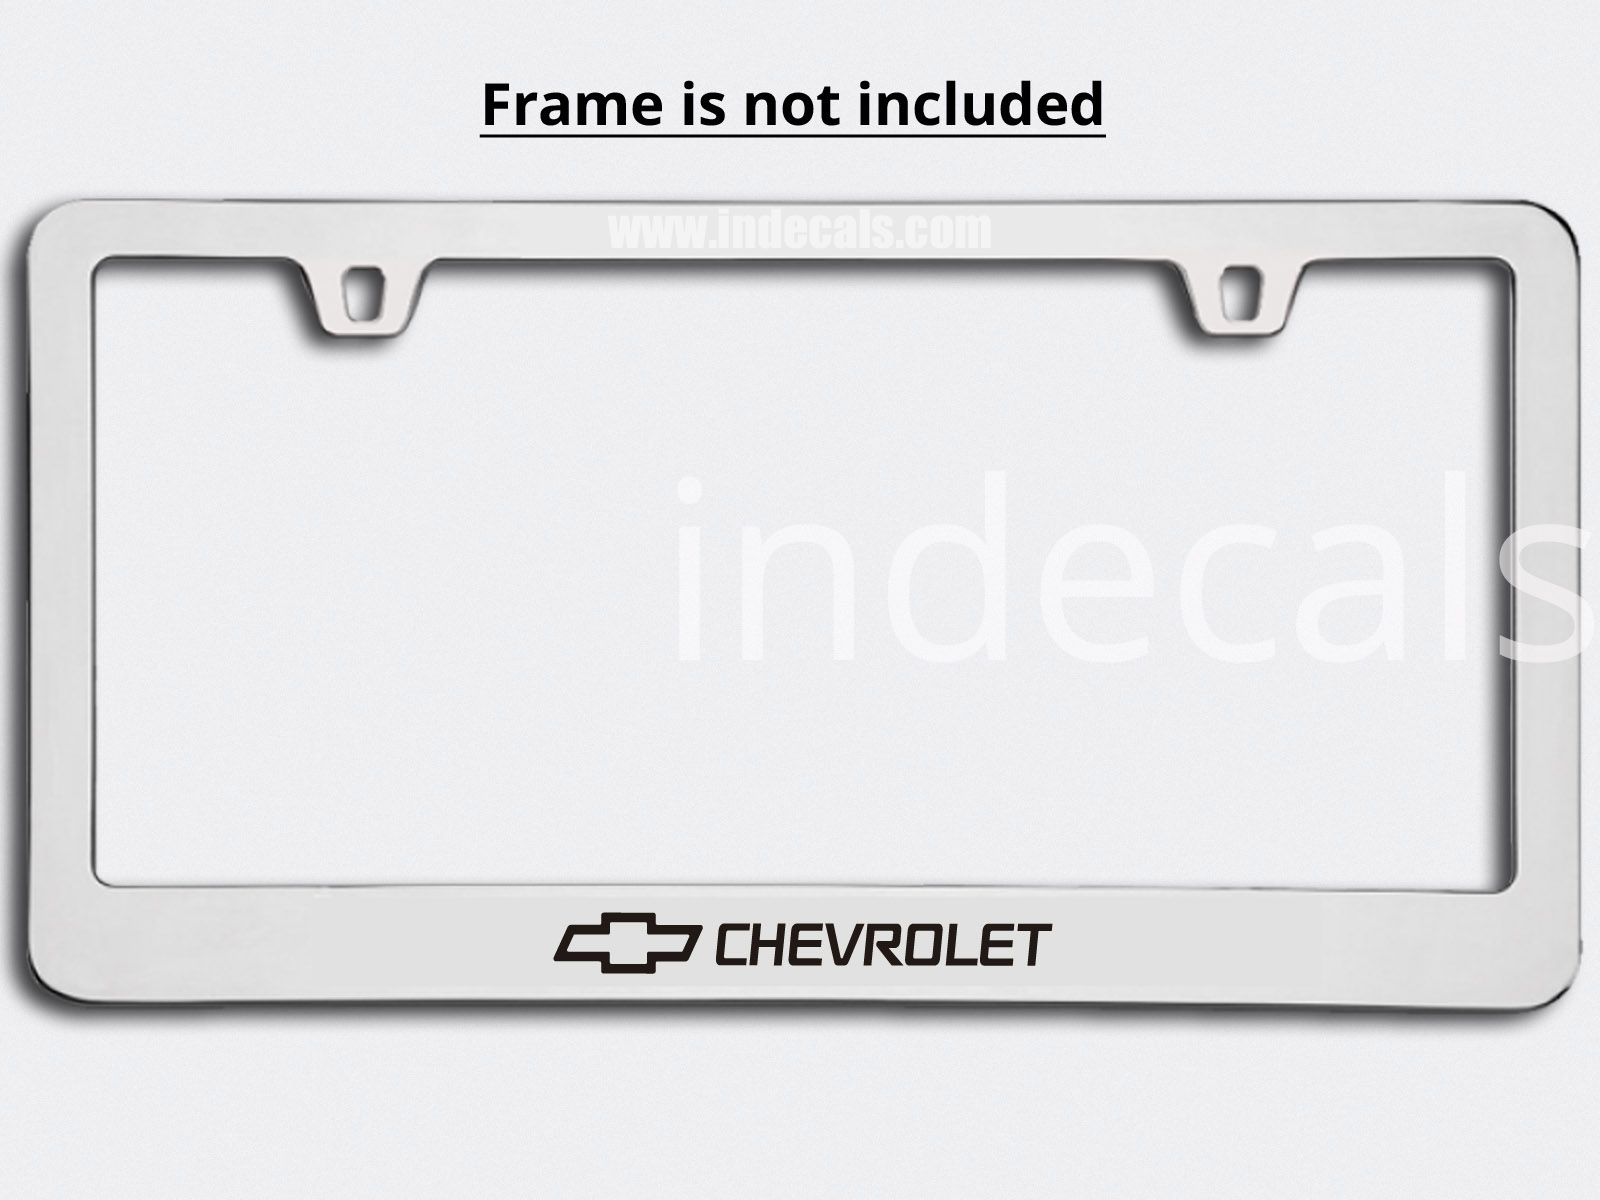 3 x Chevrolet Stickers for Plate Frame - Black